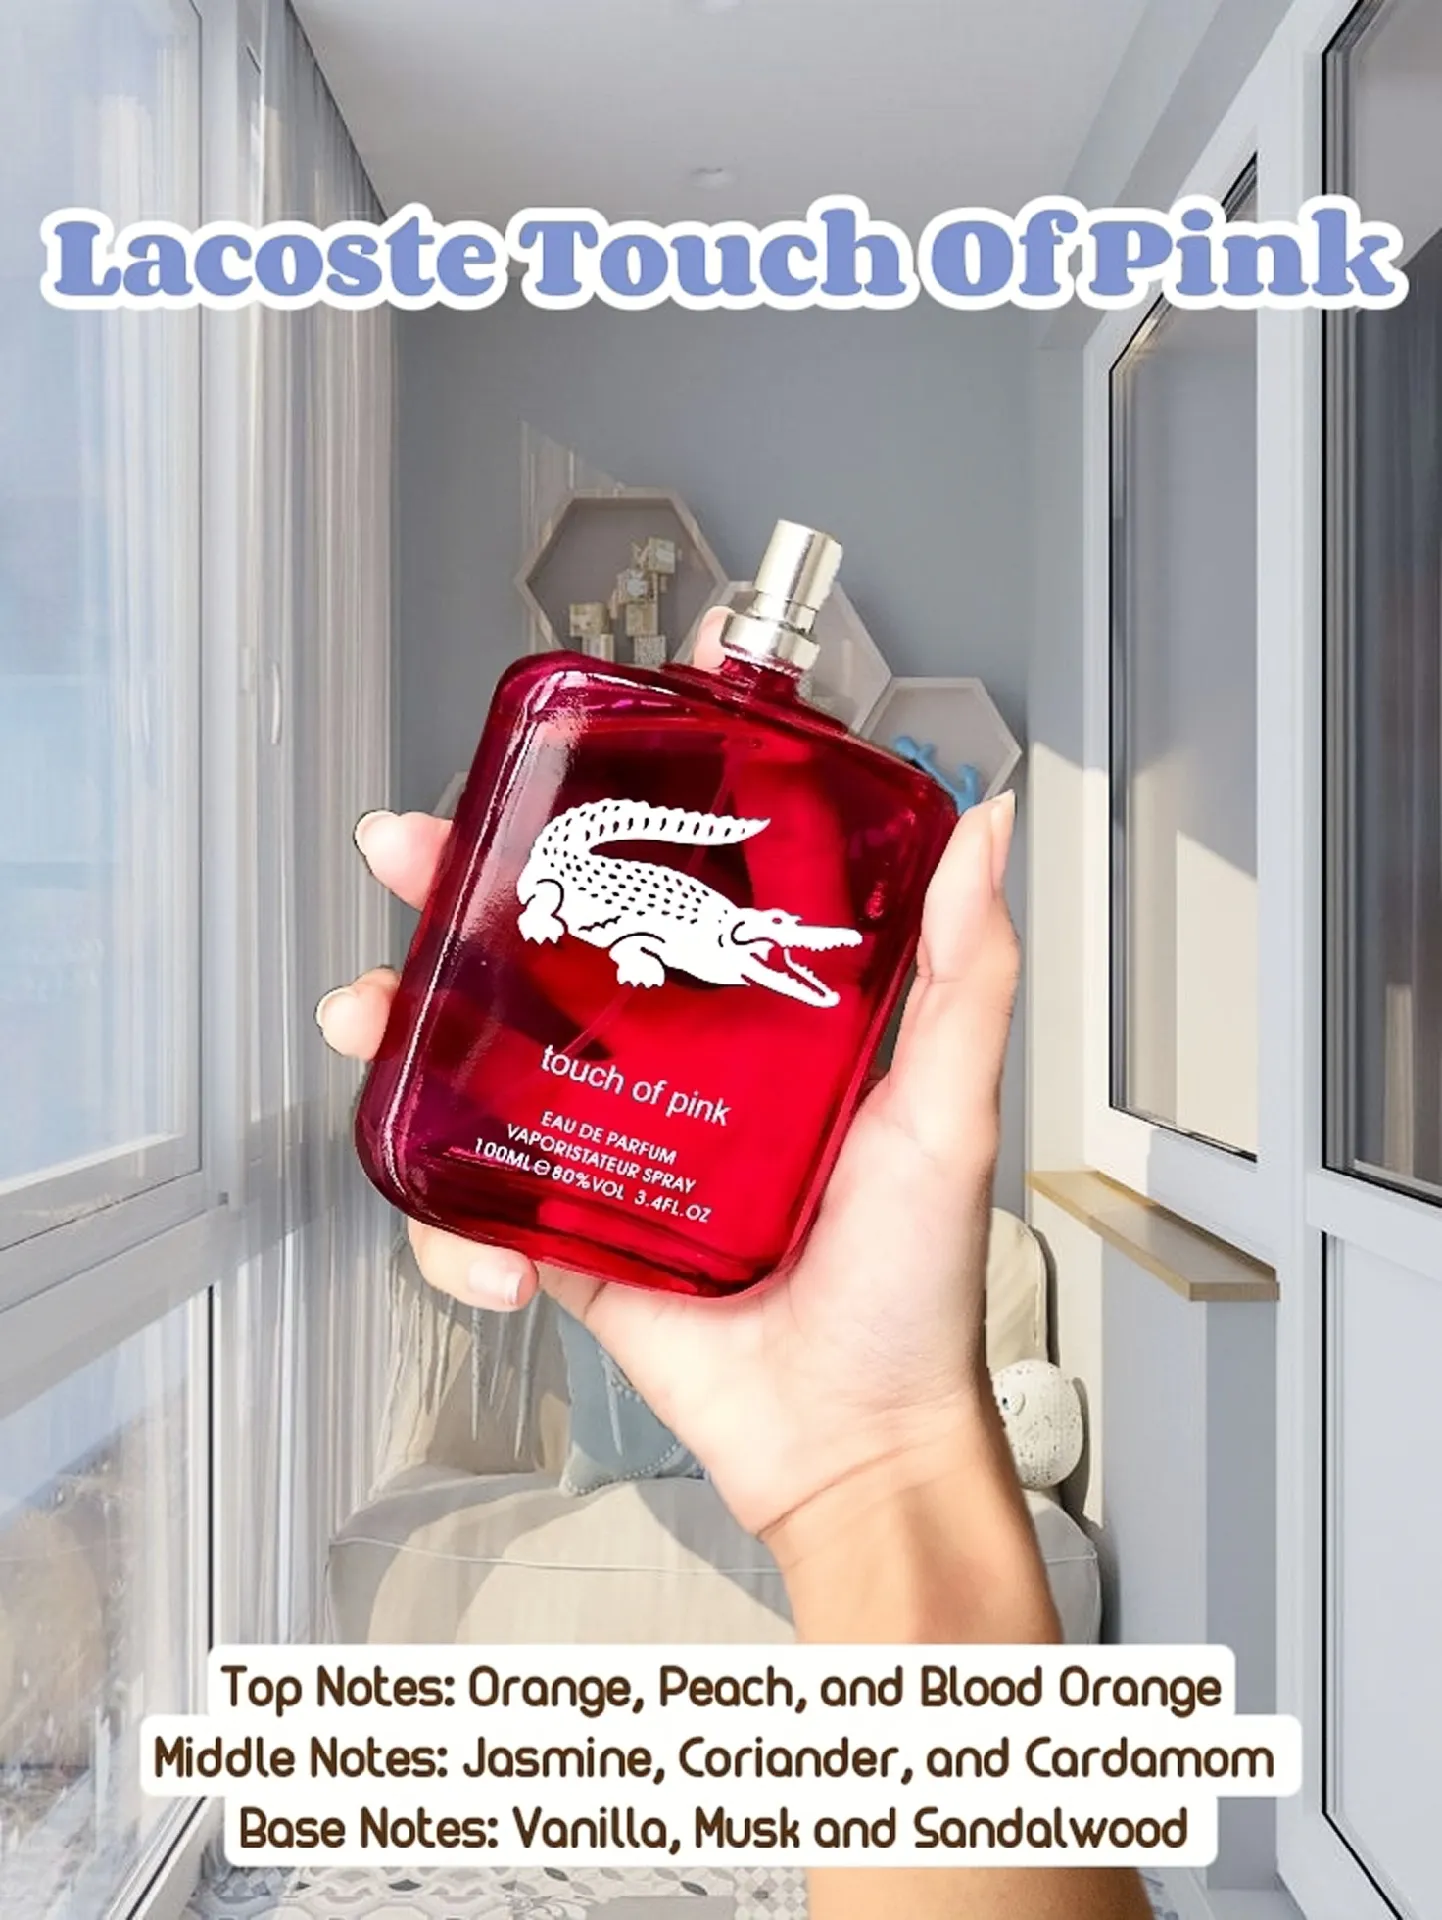 Perfume Review: Lacoste Touch Of | Gallery posted by Triz | Lemon8